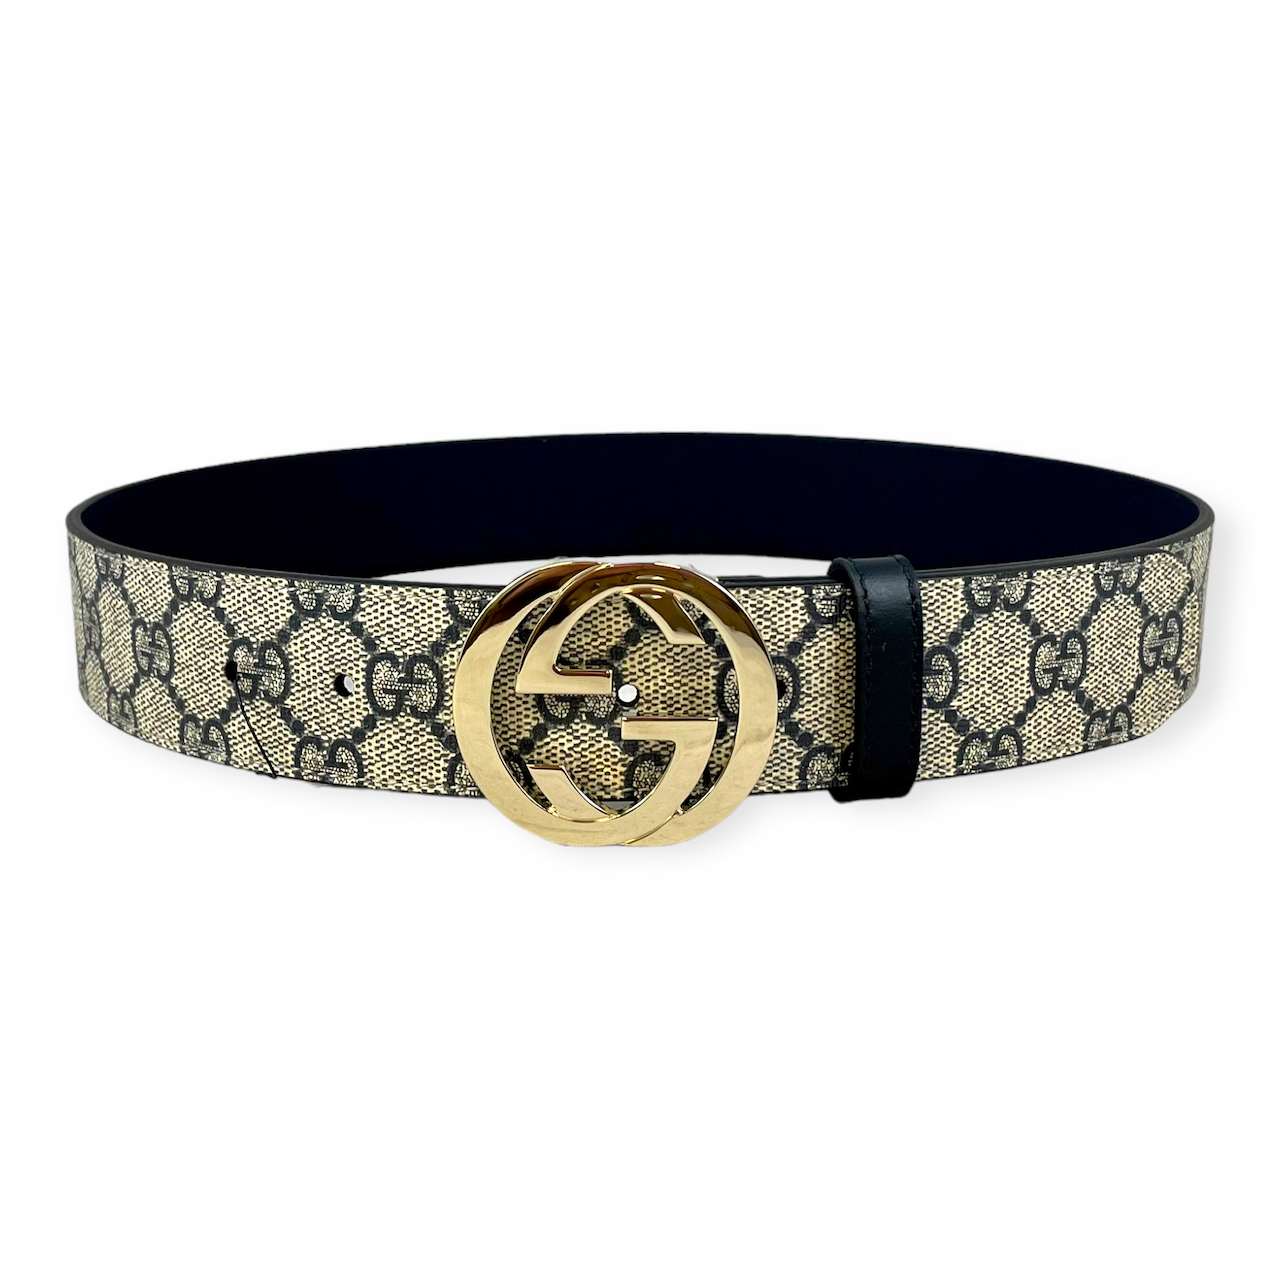 Gucci Belts for sale in Houston, Texas